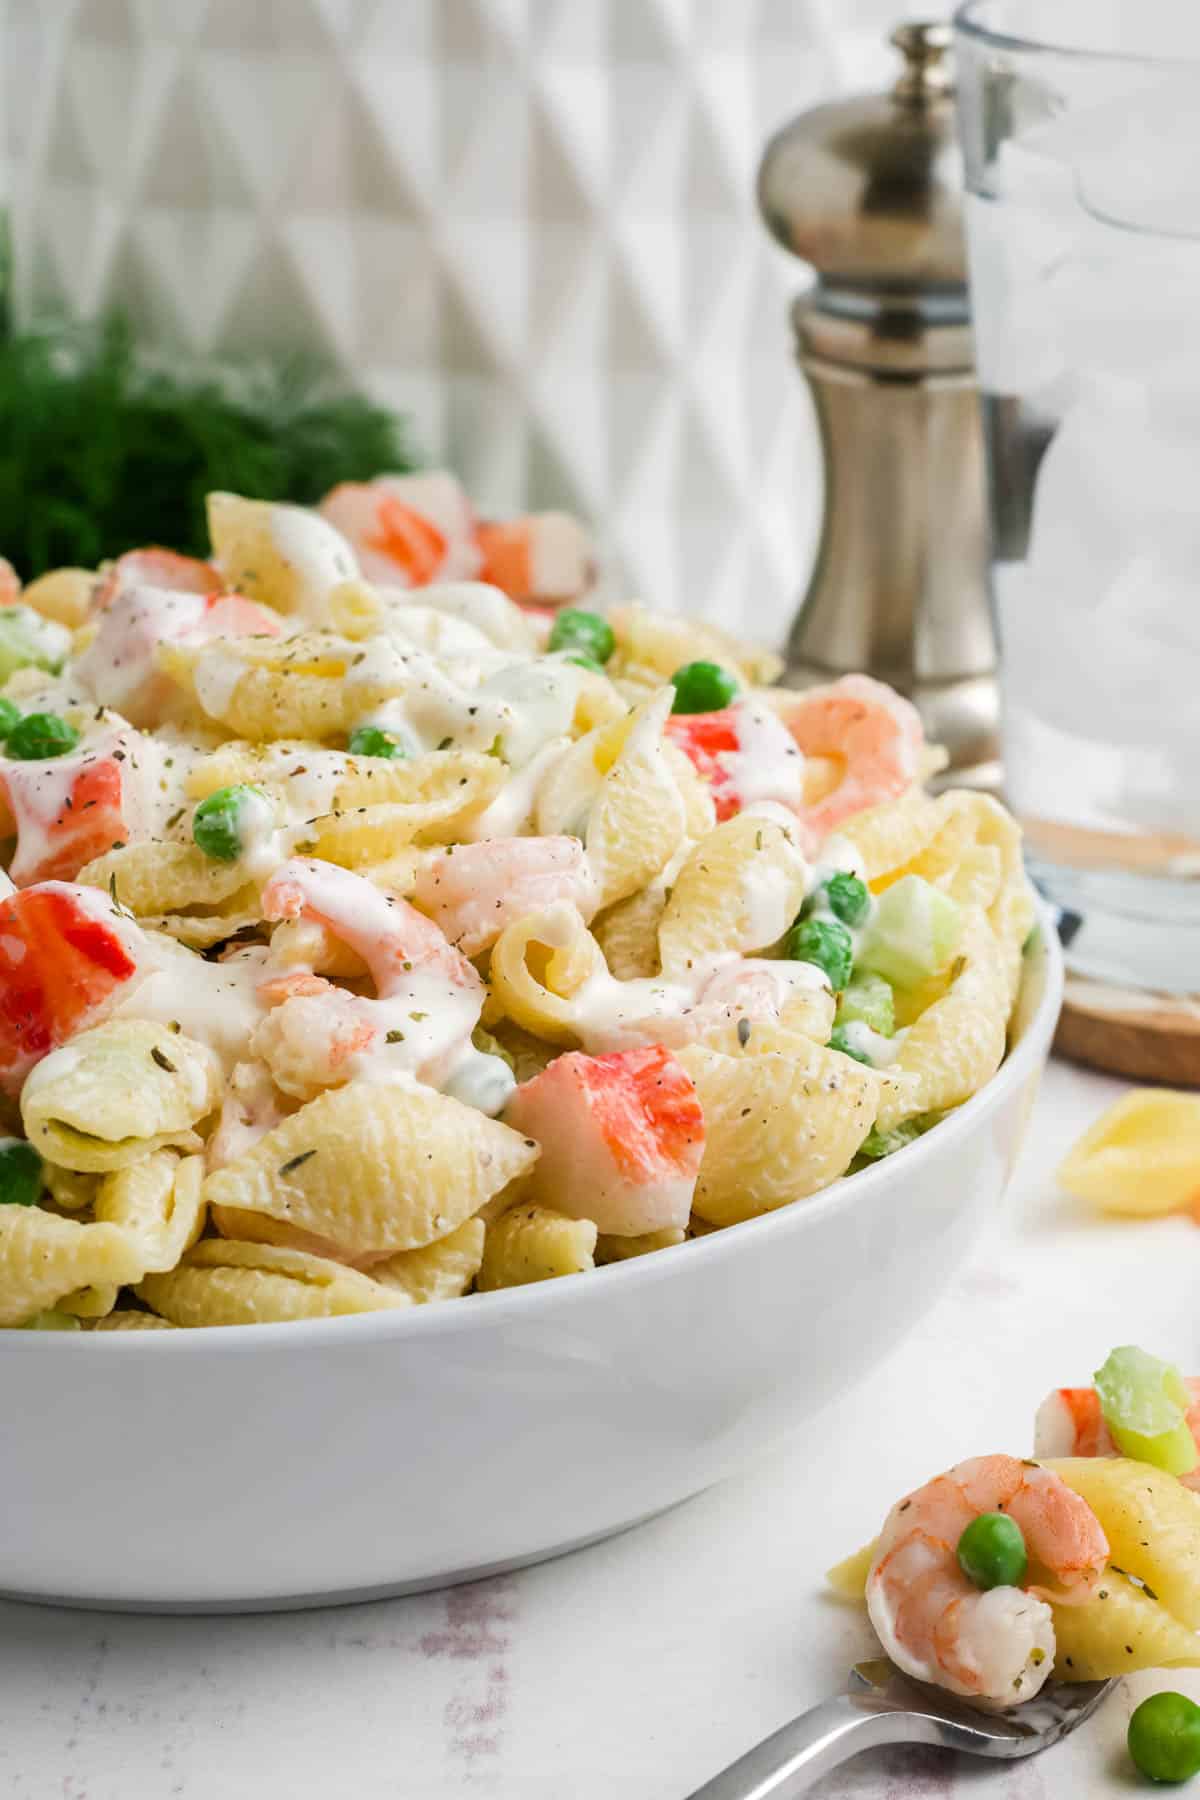 A side view of a bowl of seafood pasta salad in a white serving bowl.